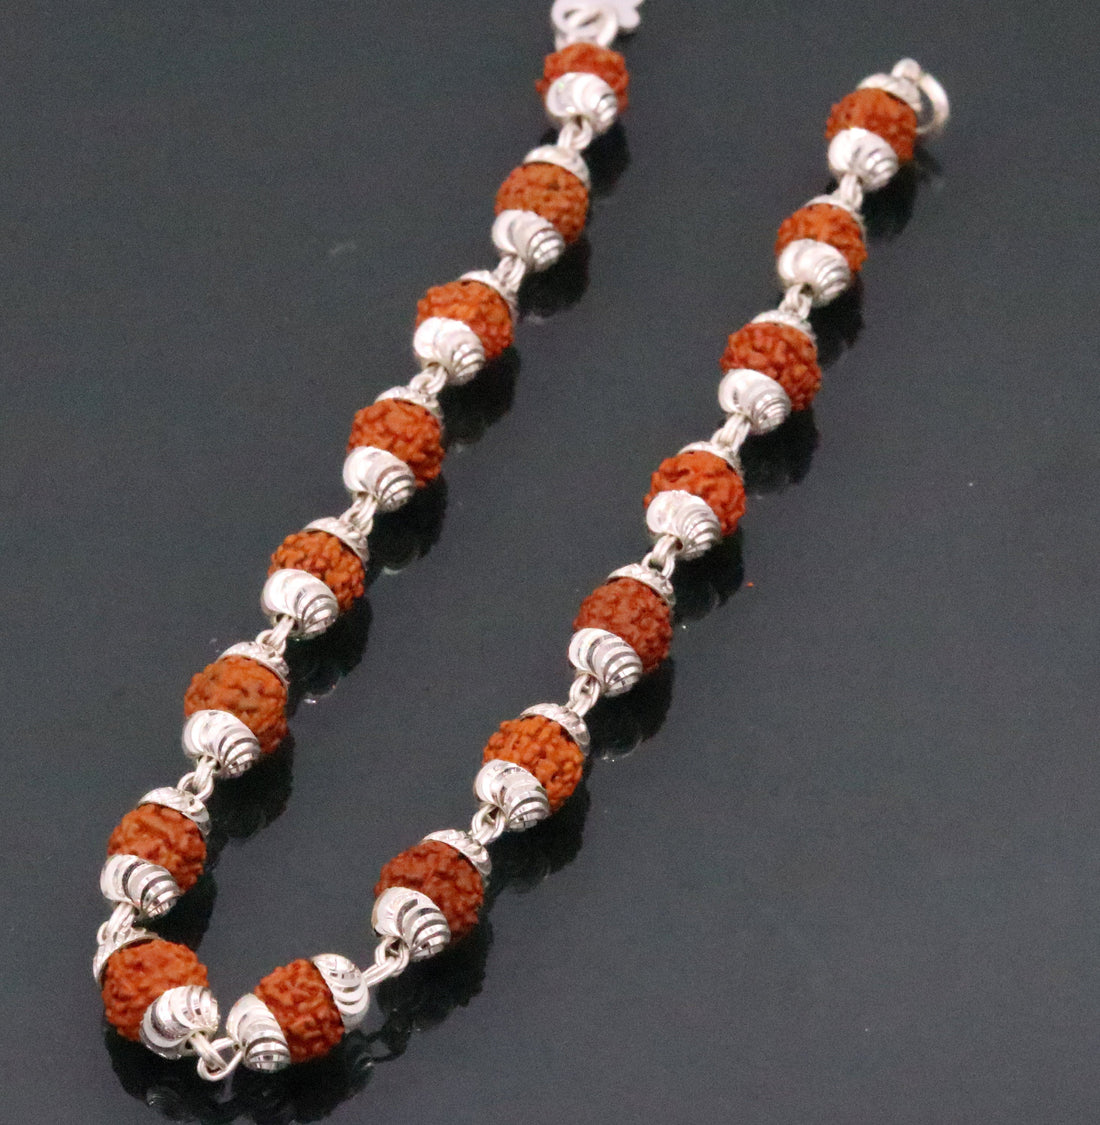 Solid silver handmade 6 mm Natural Rudraksha beads bracelet jewelry from Rajasthan India  sbr51 - TRIBAL ORNAMENTS